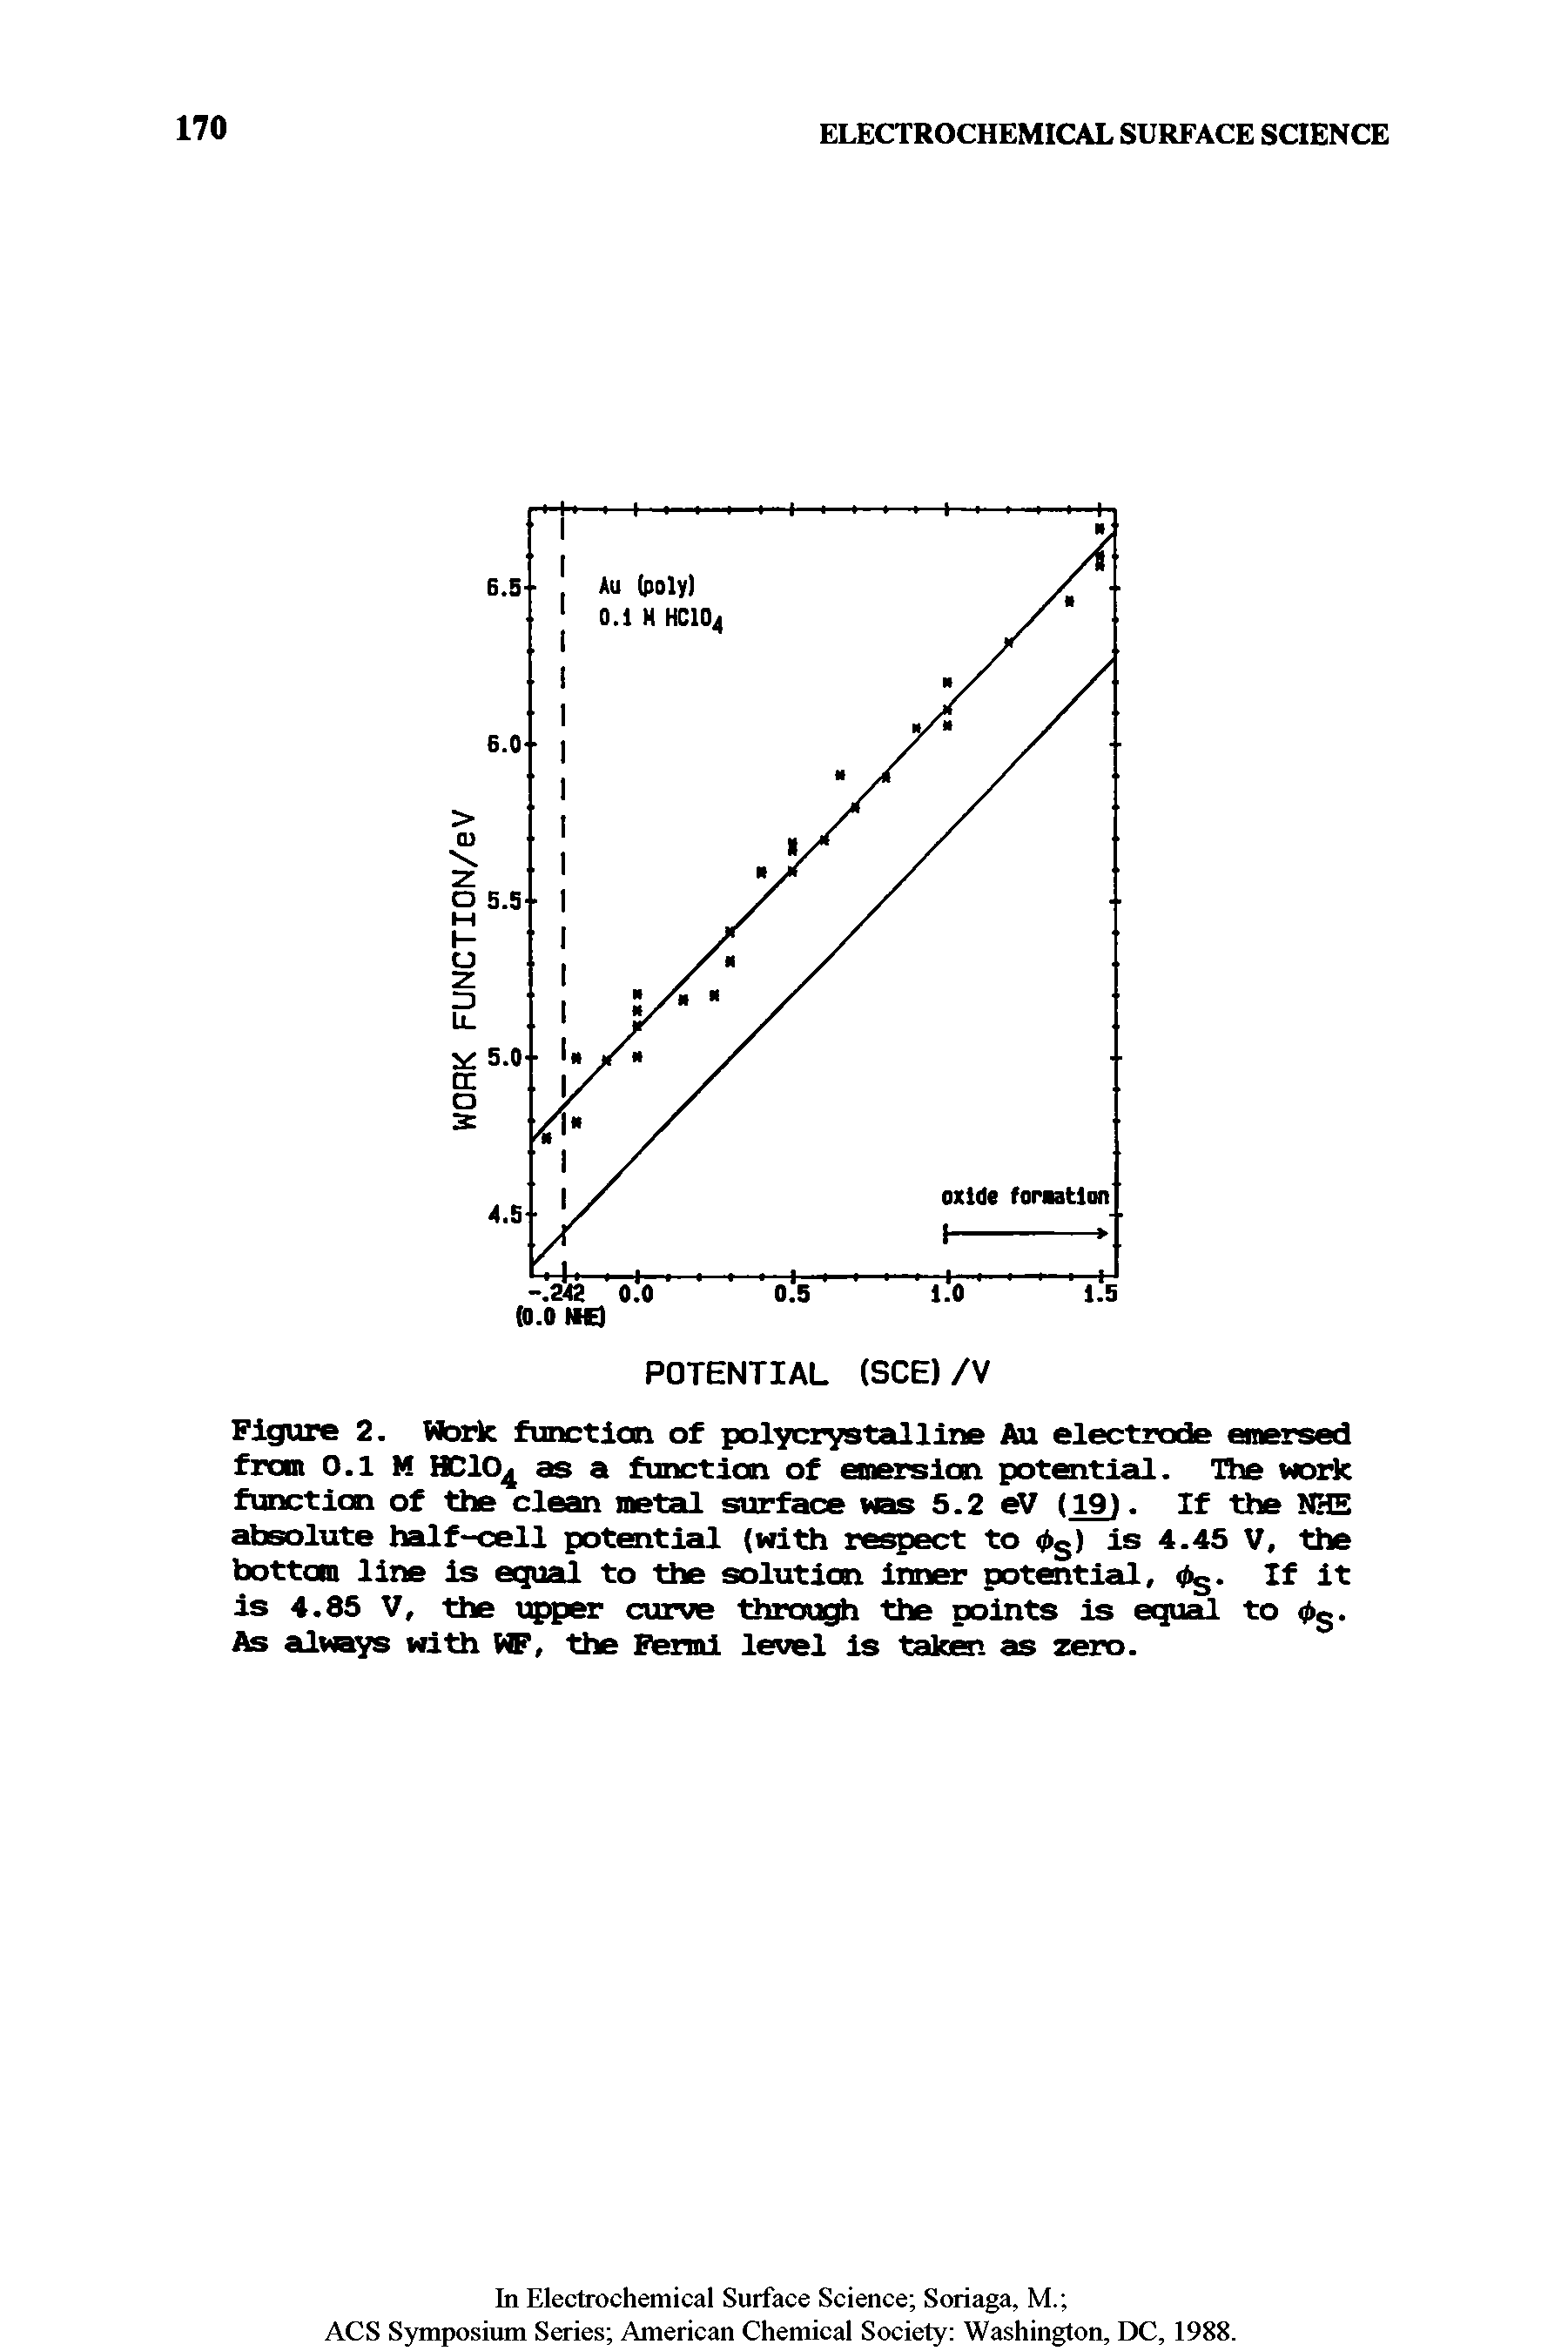 Figure 2. Work function of polycrystalline Au electrode emersed from 0.1 M HC104 as a function of emersion potential. The work function of the clean metal surface was 5.2 eV (19). If the NHE absolute half-cell potential (with respect to <t>s) is 4.45 V, the bottom line is equal to the solution inner potential, tfg. If it is 4.85 V, the upper curve through the points is equal to 0g. As always with WF, the Fermi level is taken as zero.